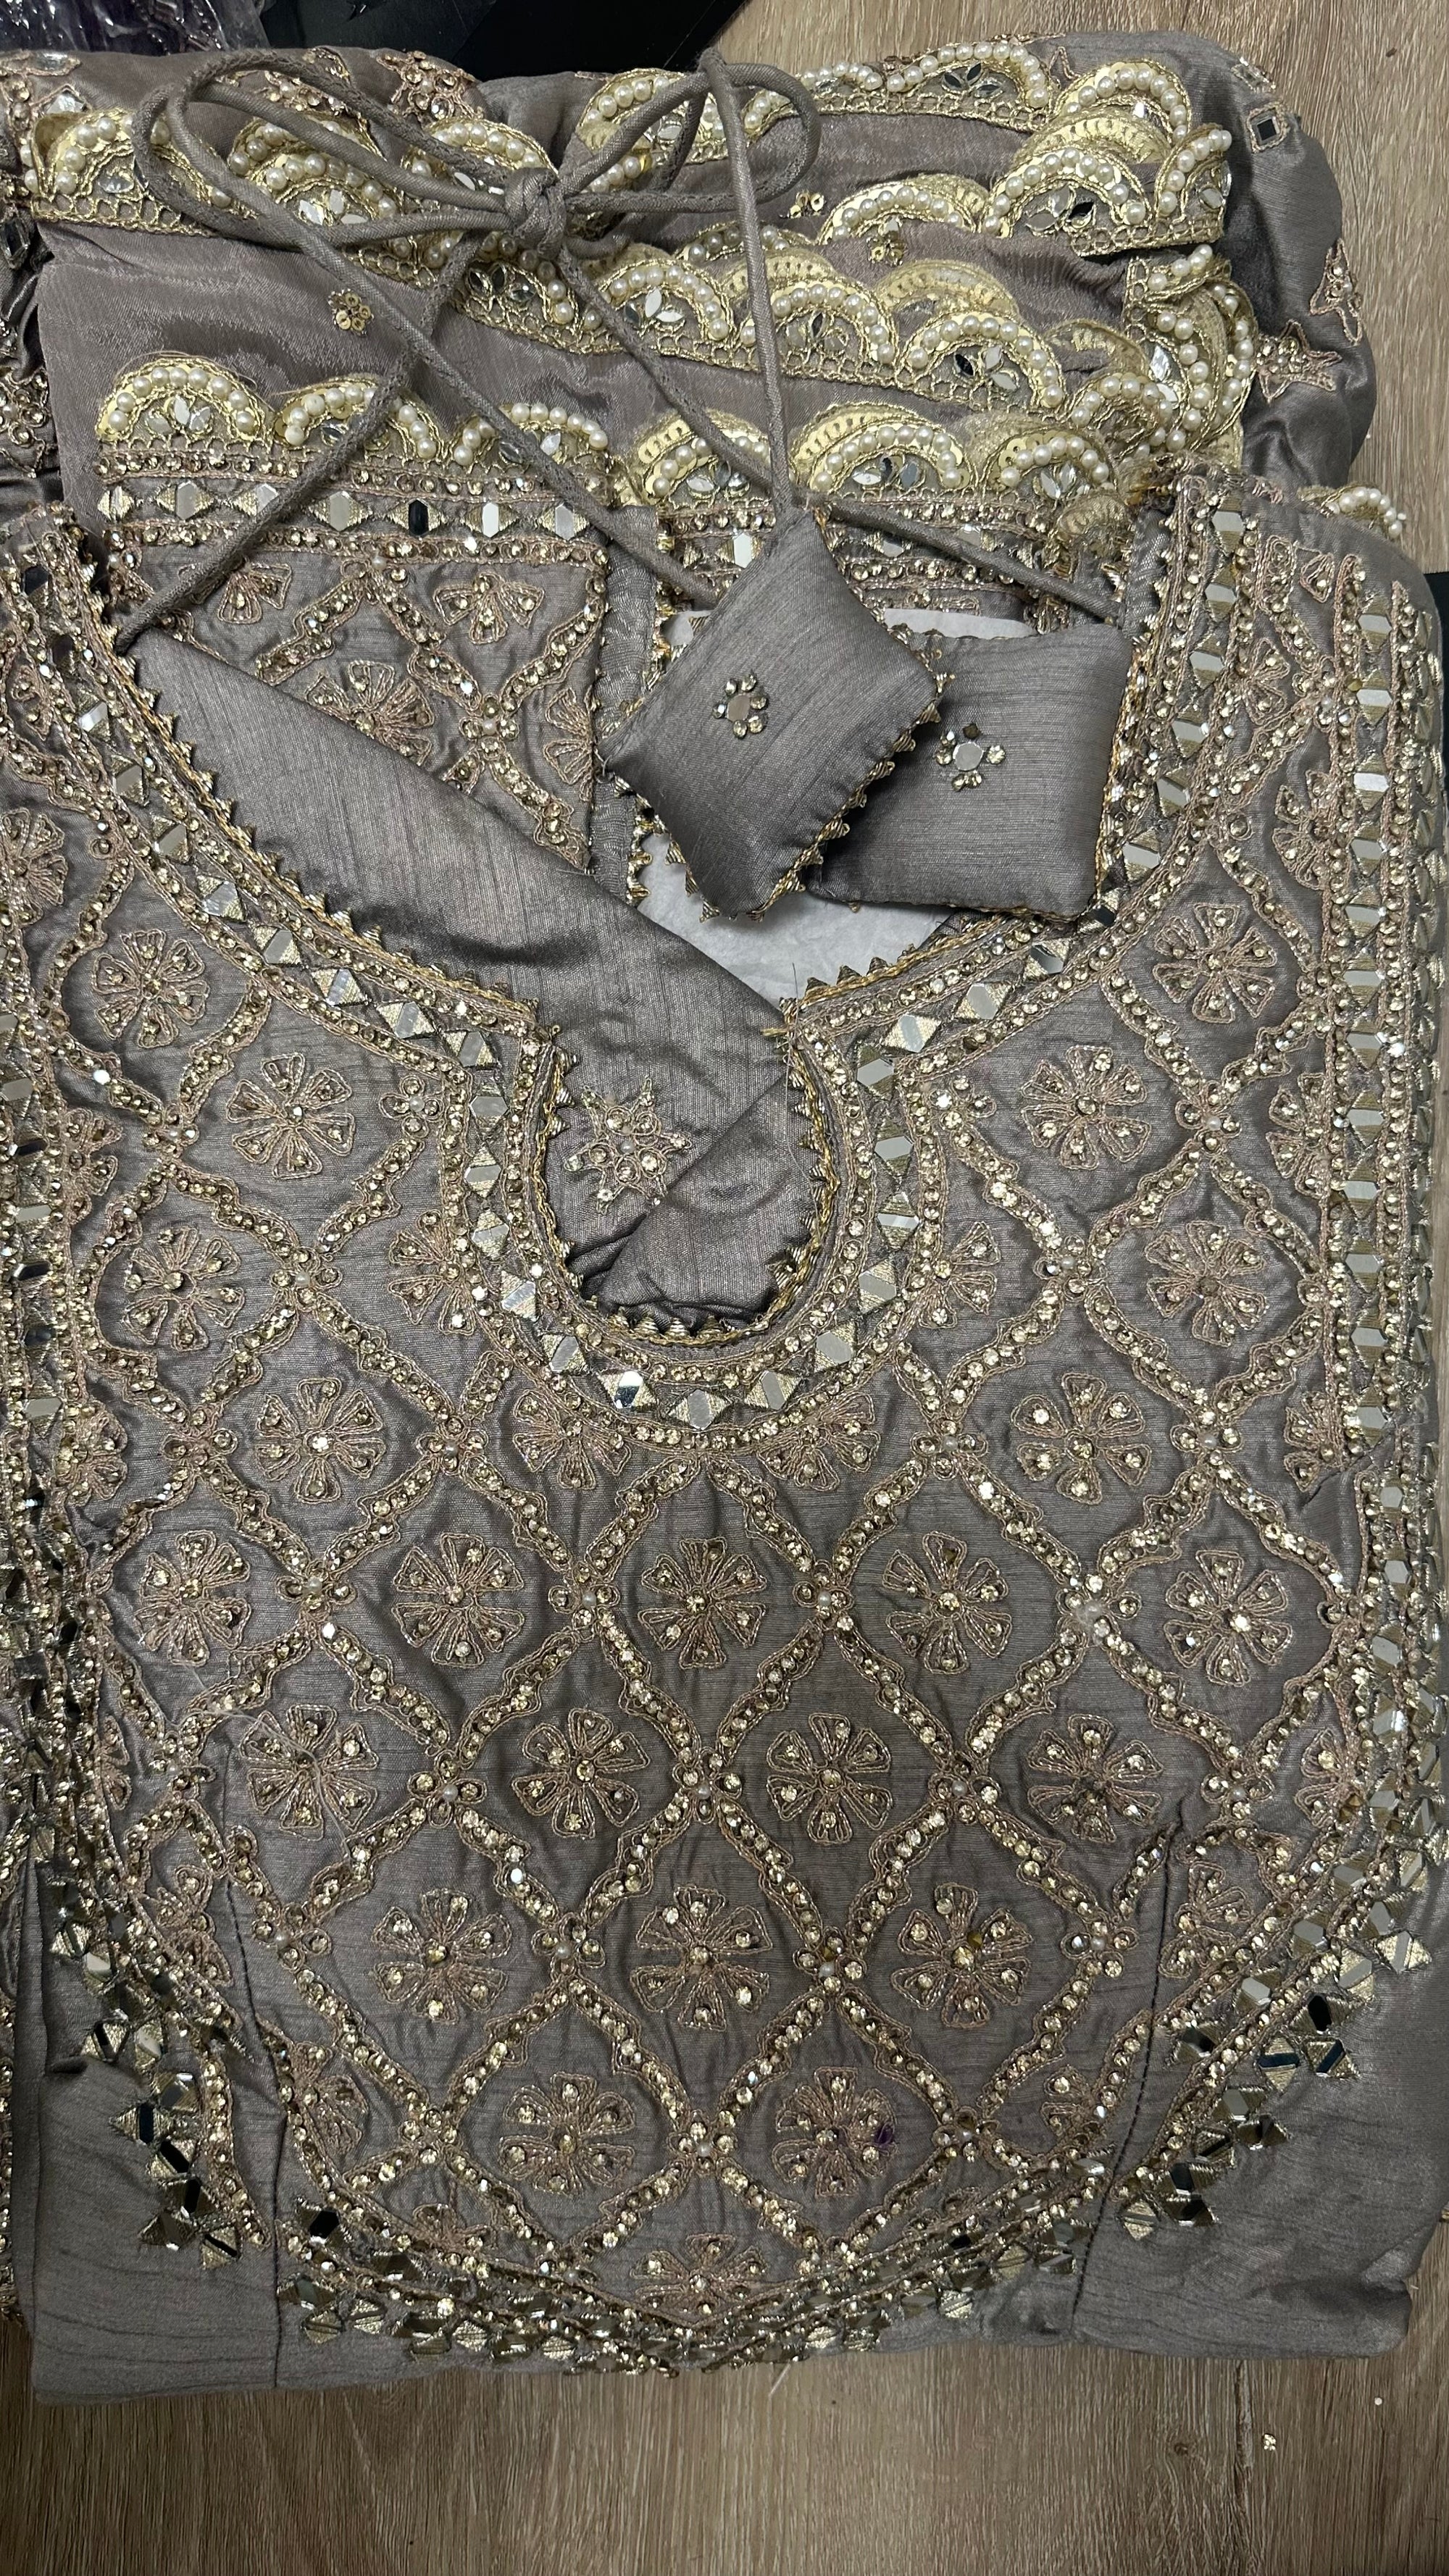 Stunning Sharara Suit with Scalping